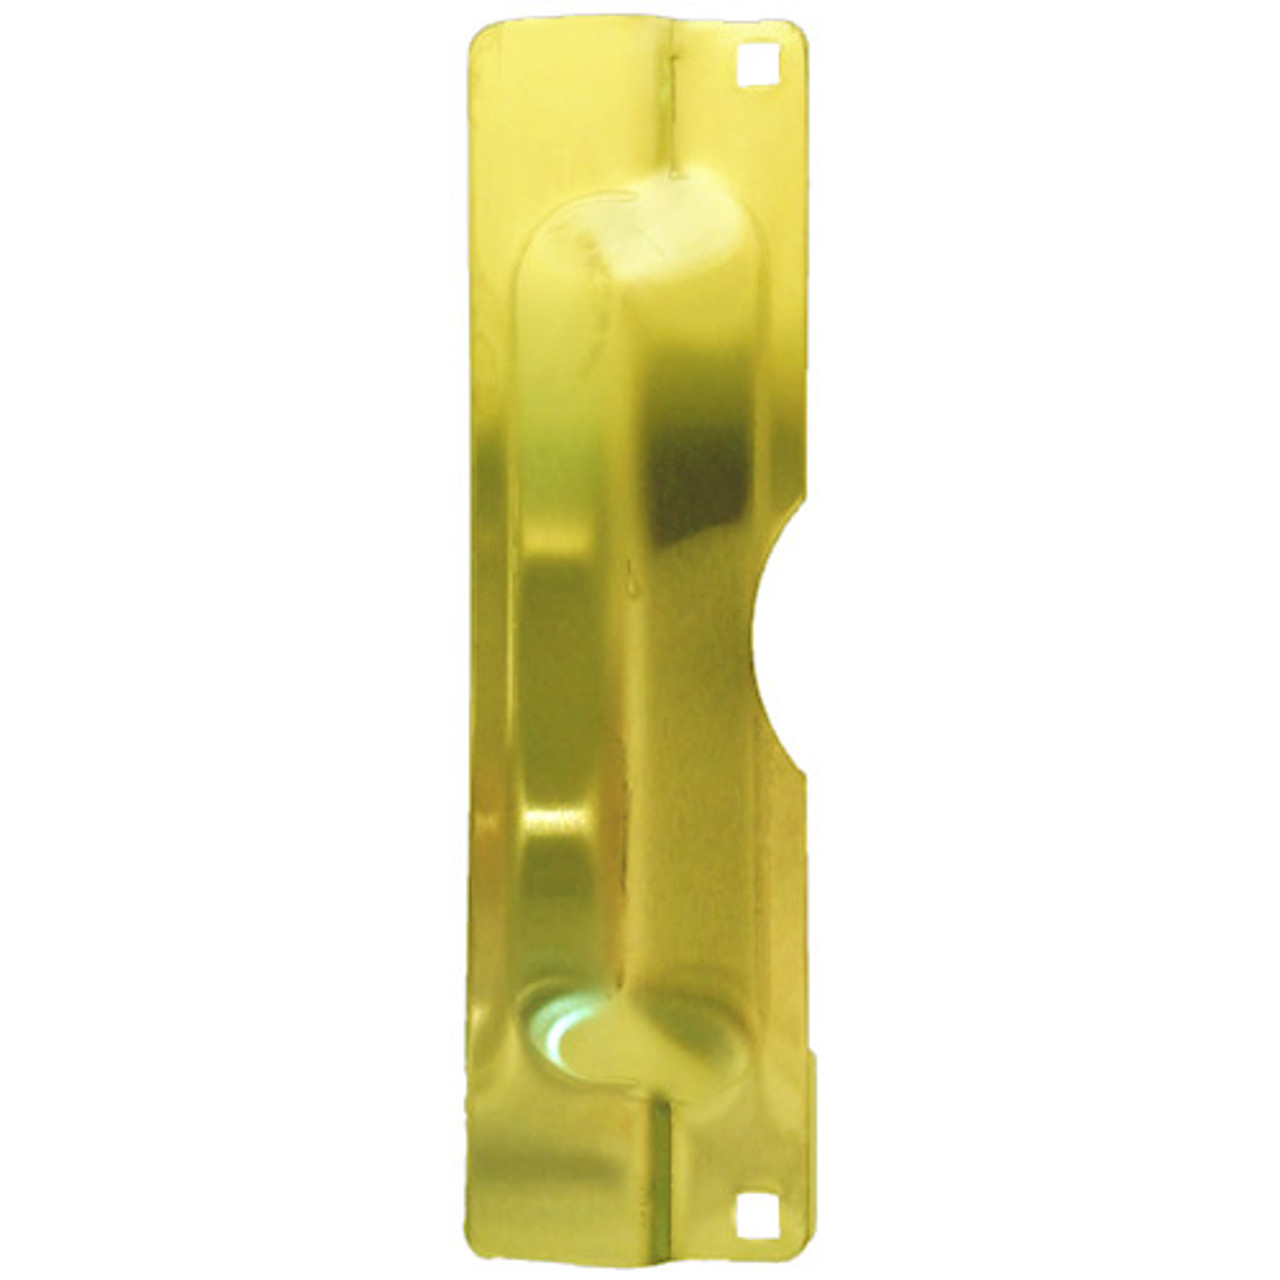 LP-211-EBF-BP Don Jo Latch Protector in Brass Plated Finish